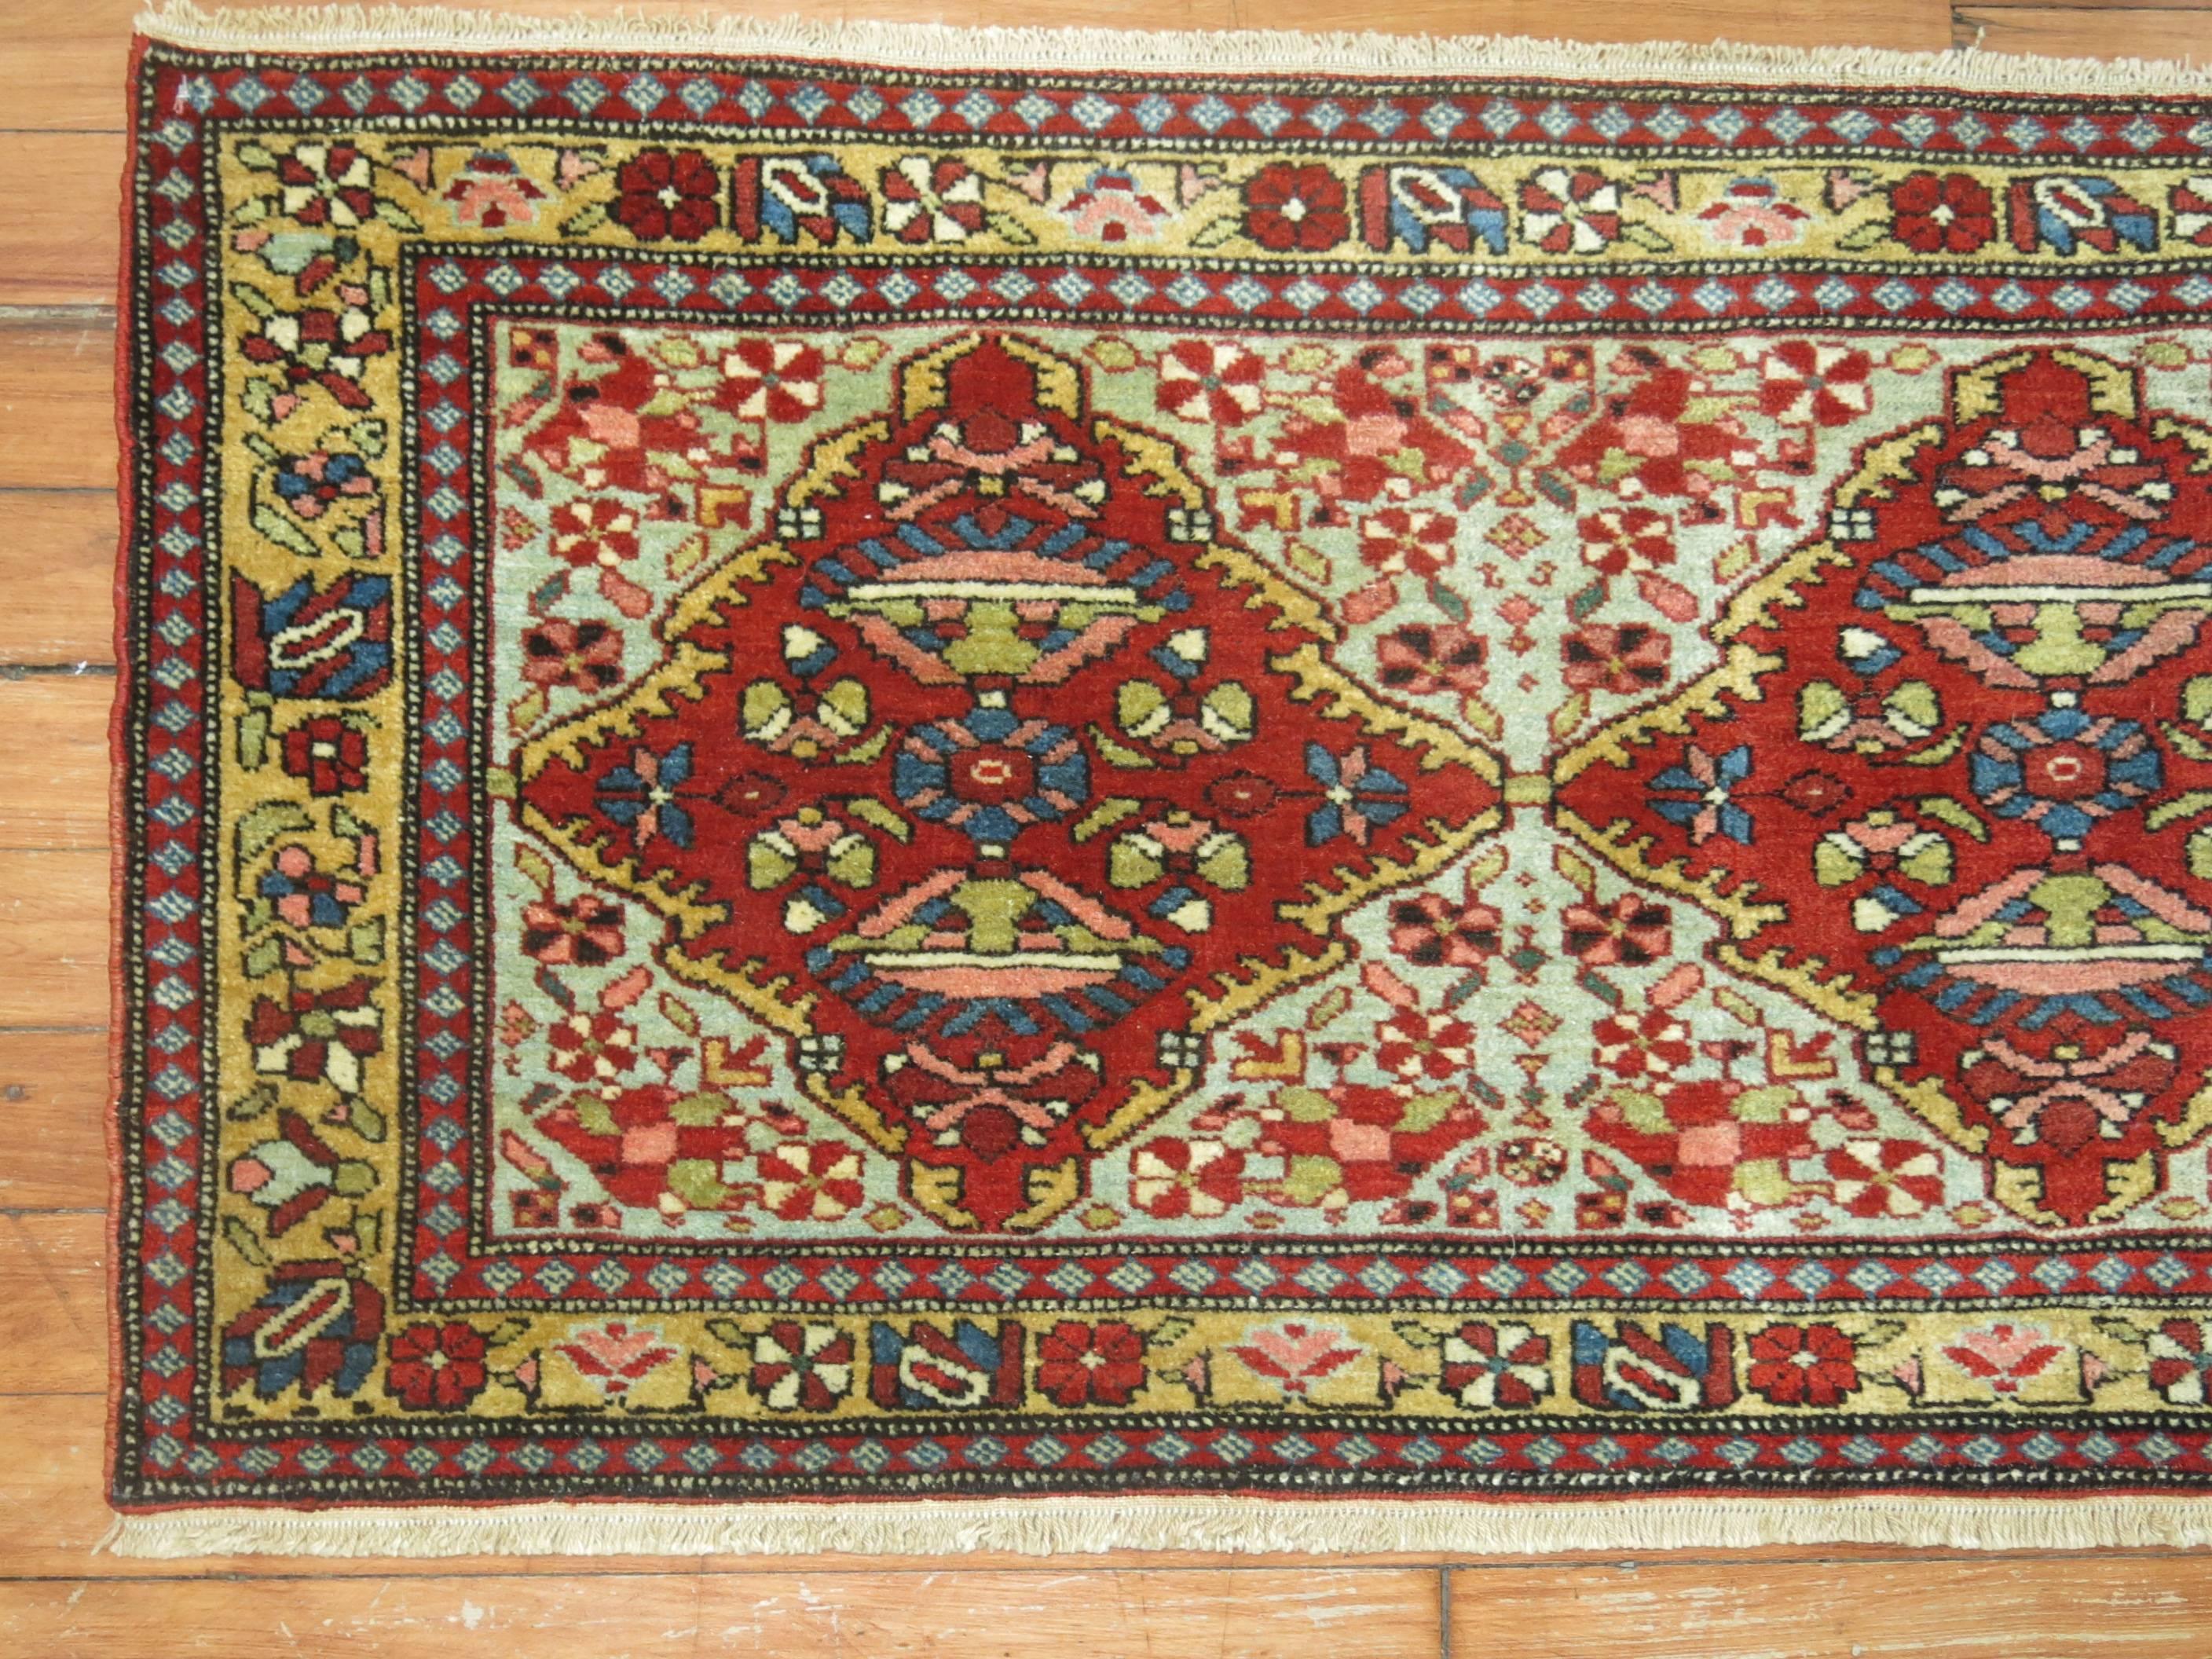 20th Century Jewel Tone Fine Quality Antique Persian Malayer Narrow Horizontal Woven Rug For Sale